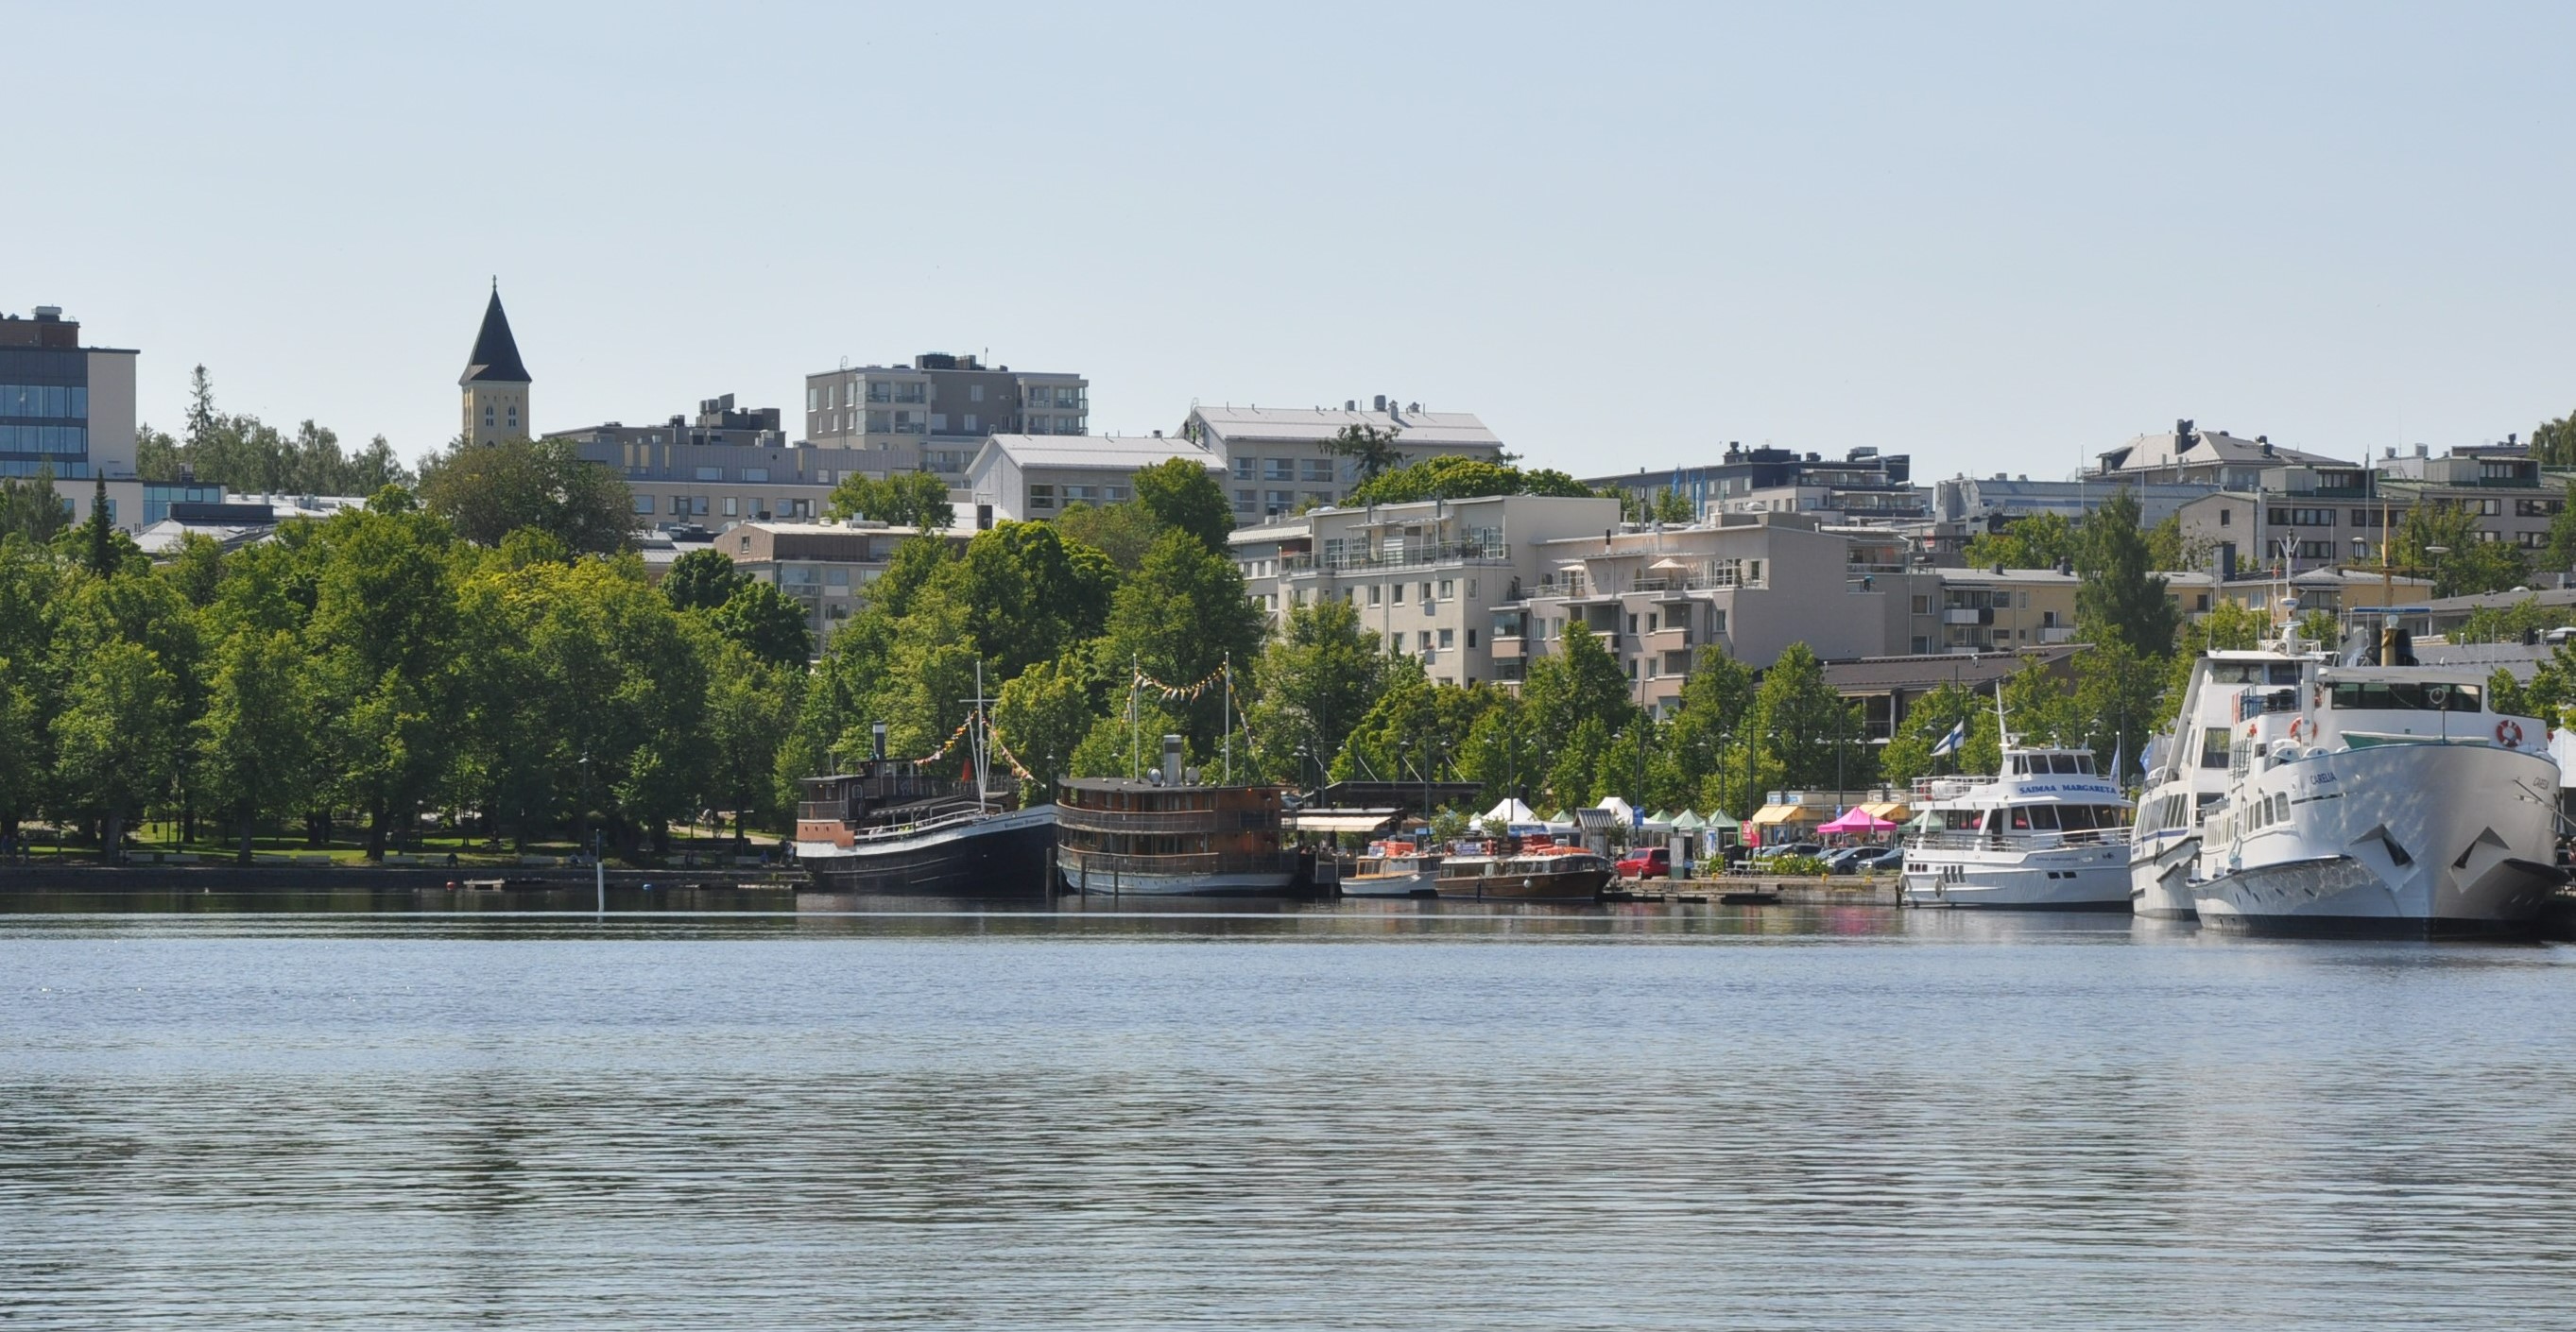 The harbor of Lappeenranta. In the front, boats. Green trees and city buildings in the background.